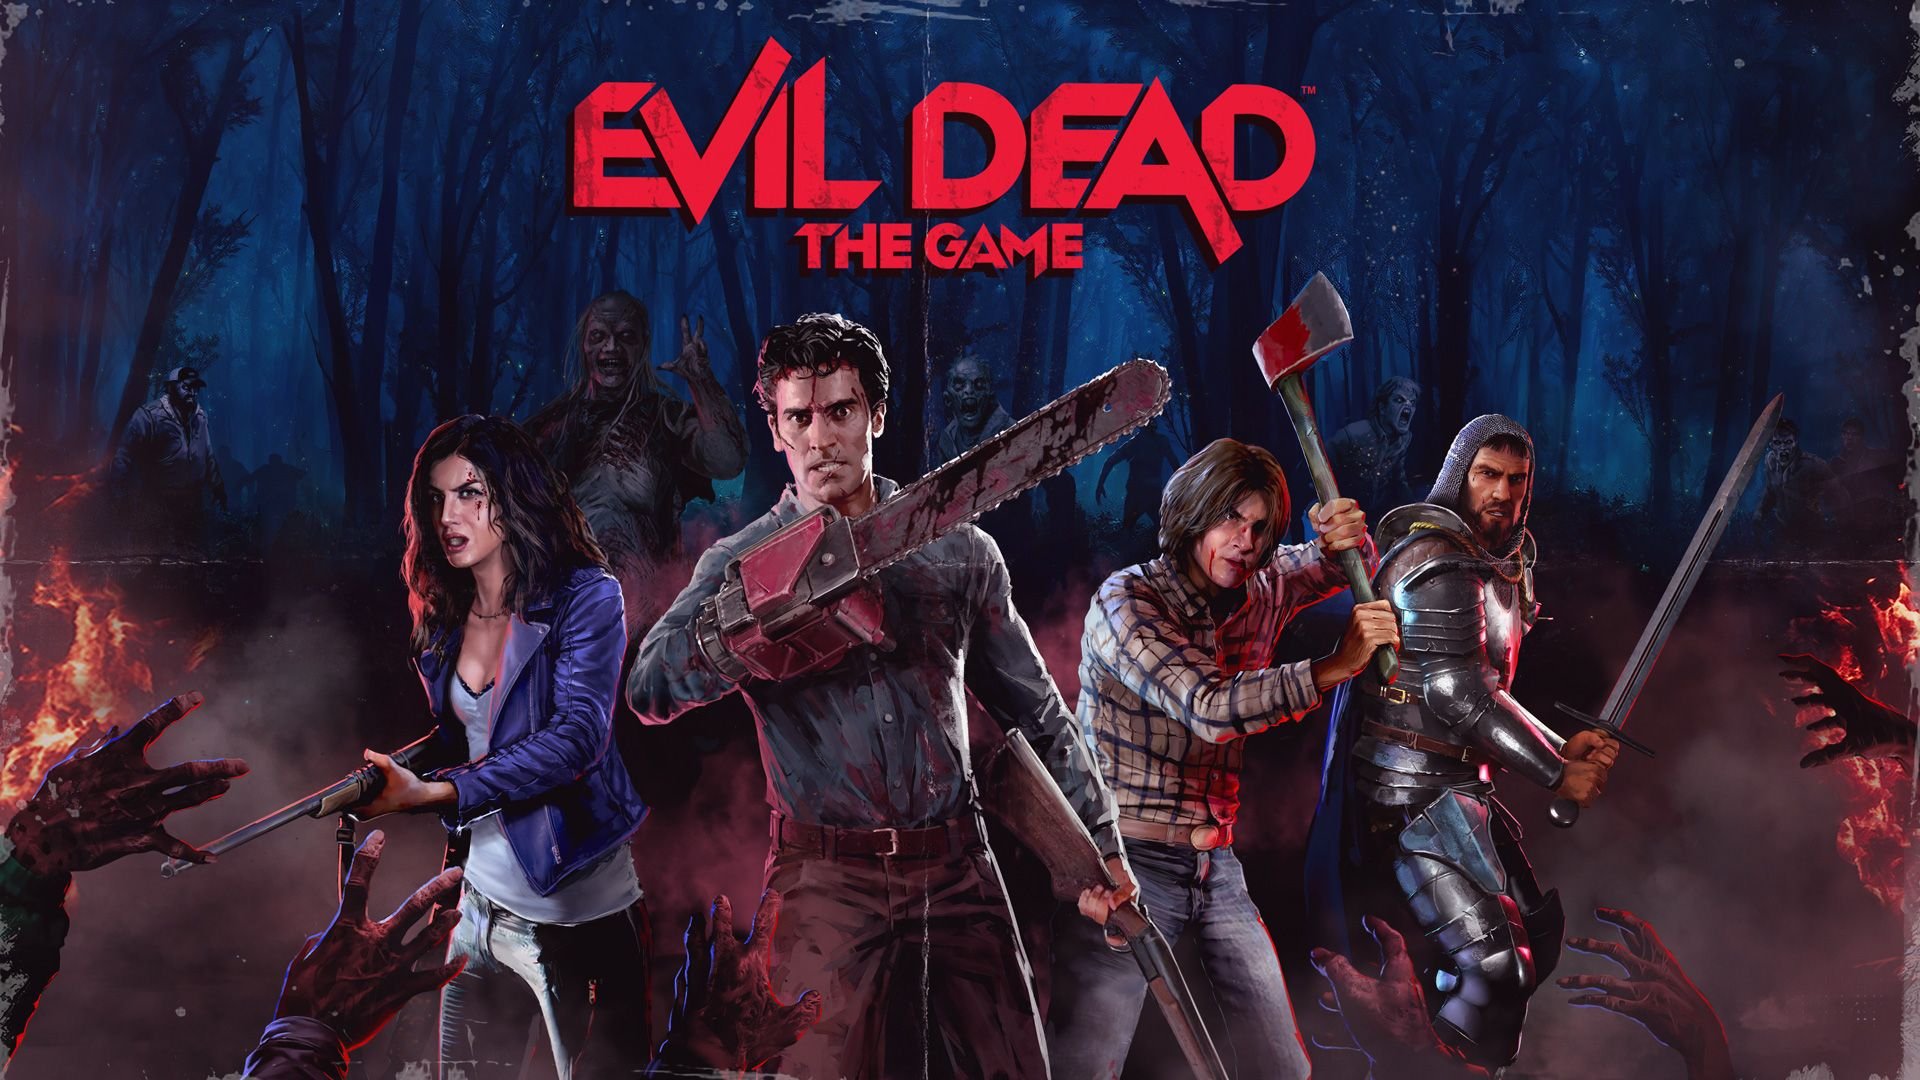 Evil Dead: The Game review - One of the best surprises of 2022 so far